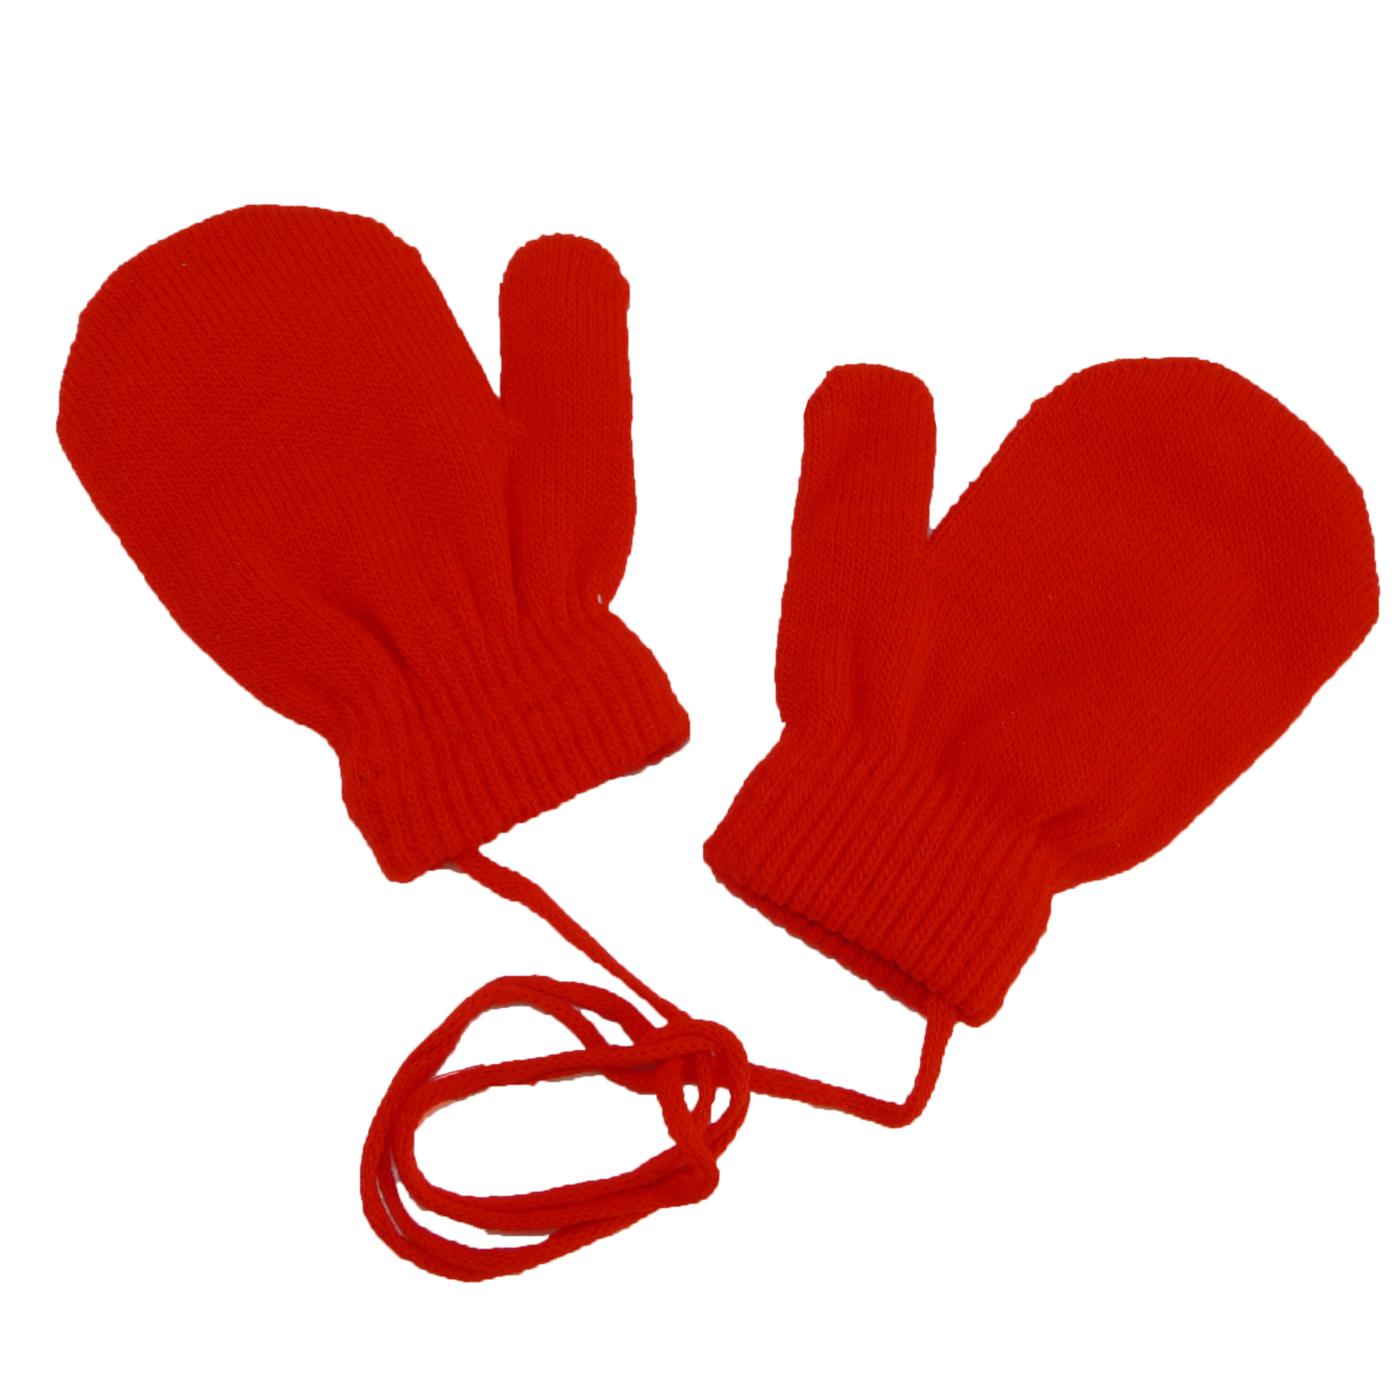 Winter Mittens Clipart Picture Of Mittens   Clipart